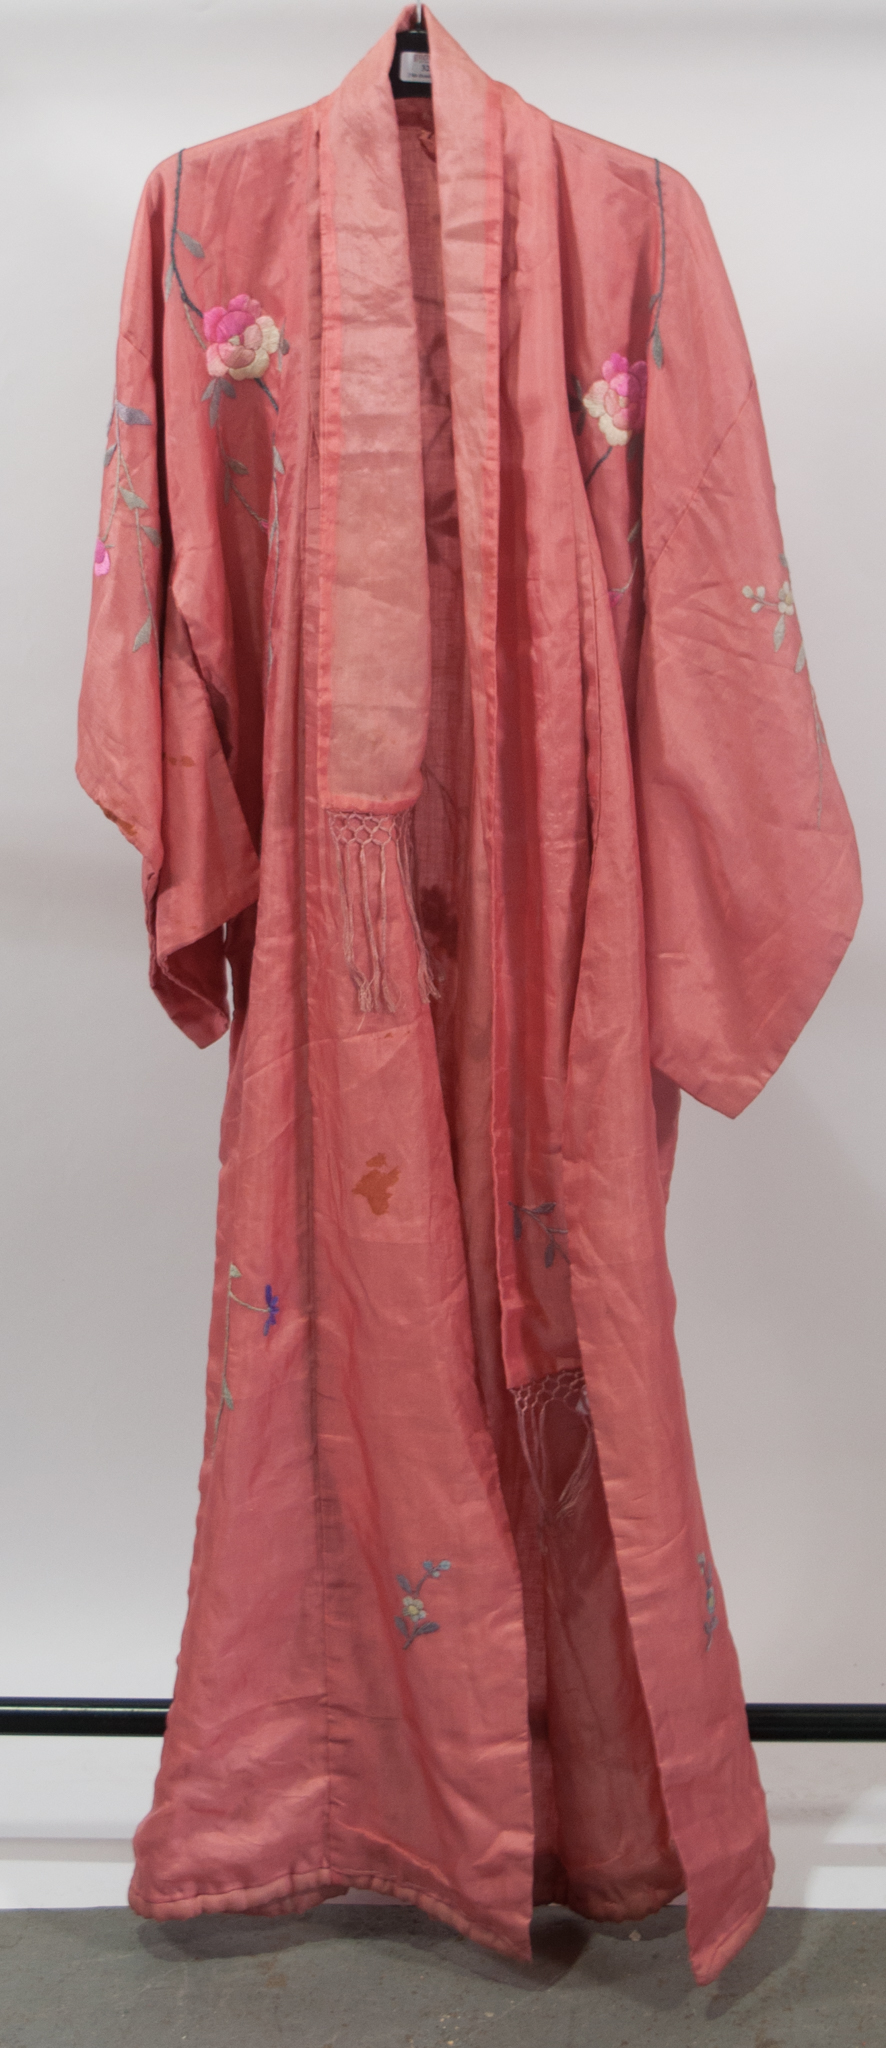 Salmon pink silk kimono, 1930s, with floral embroidered decoration, complete with sash.